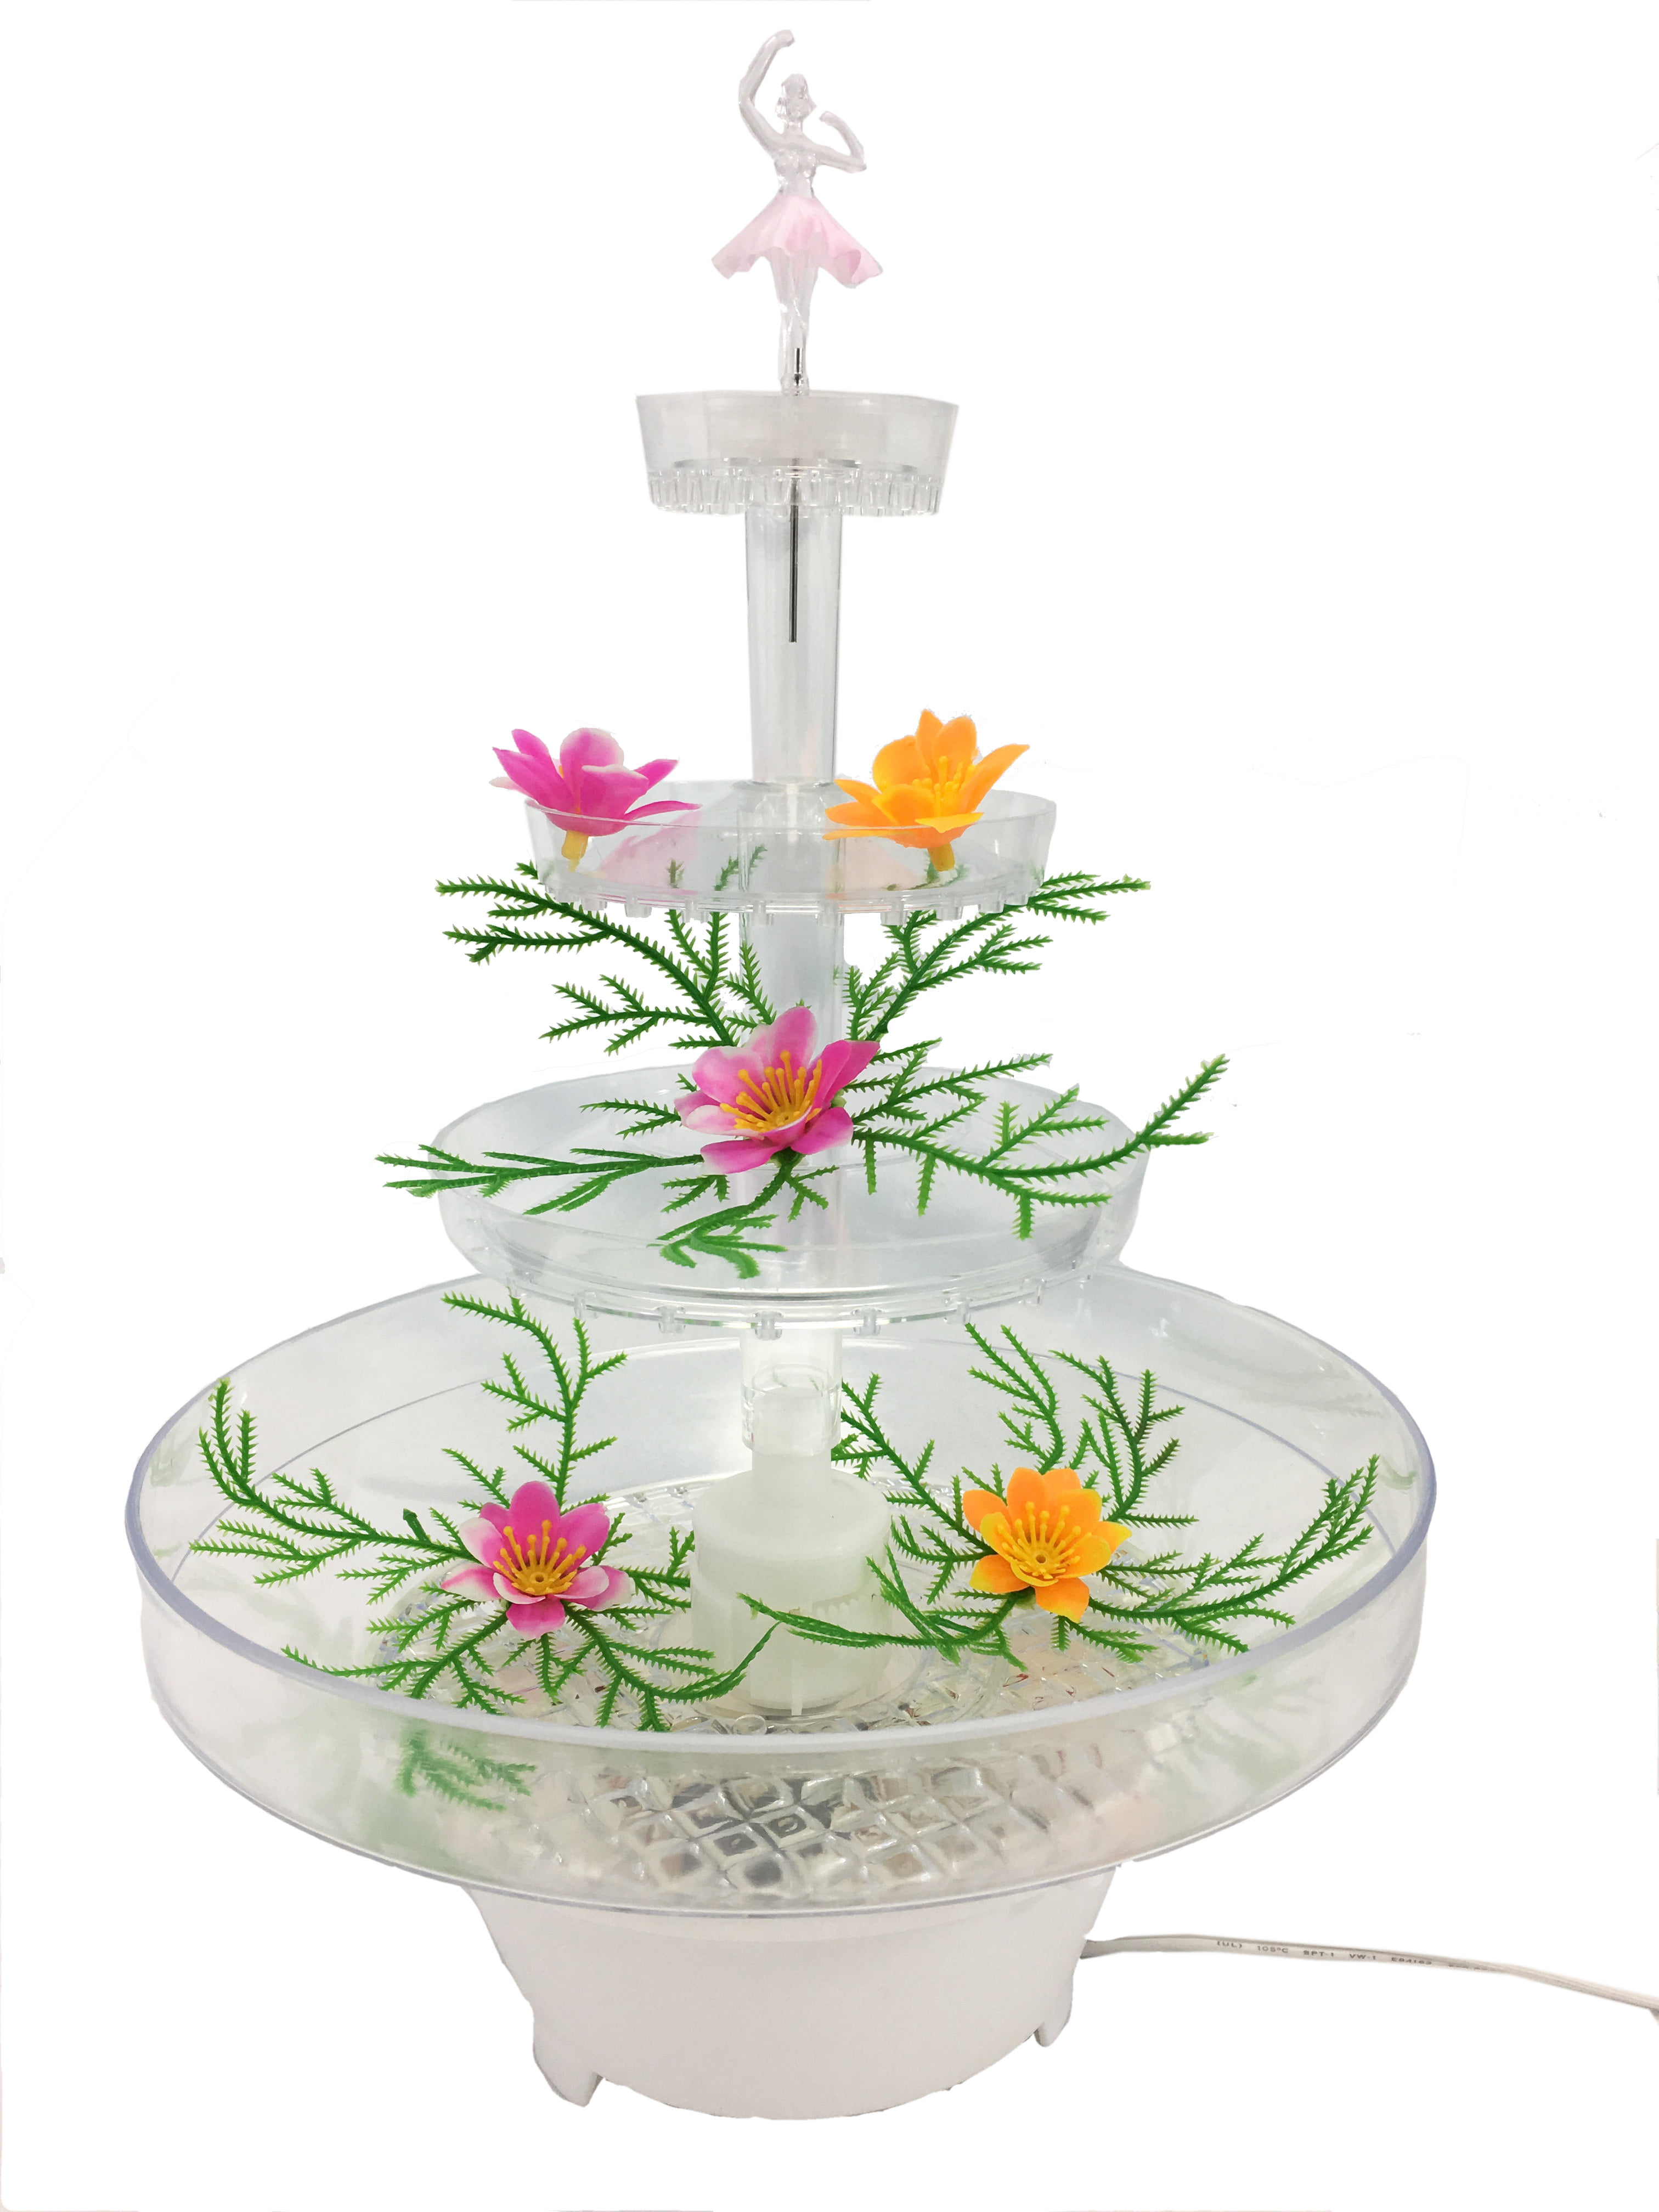 LA Crafts Lighted Plastic Water Fountain For Weddings Home or Cake Centerpiece Office Garden 13 inch